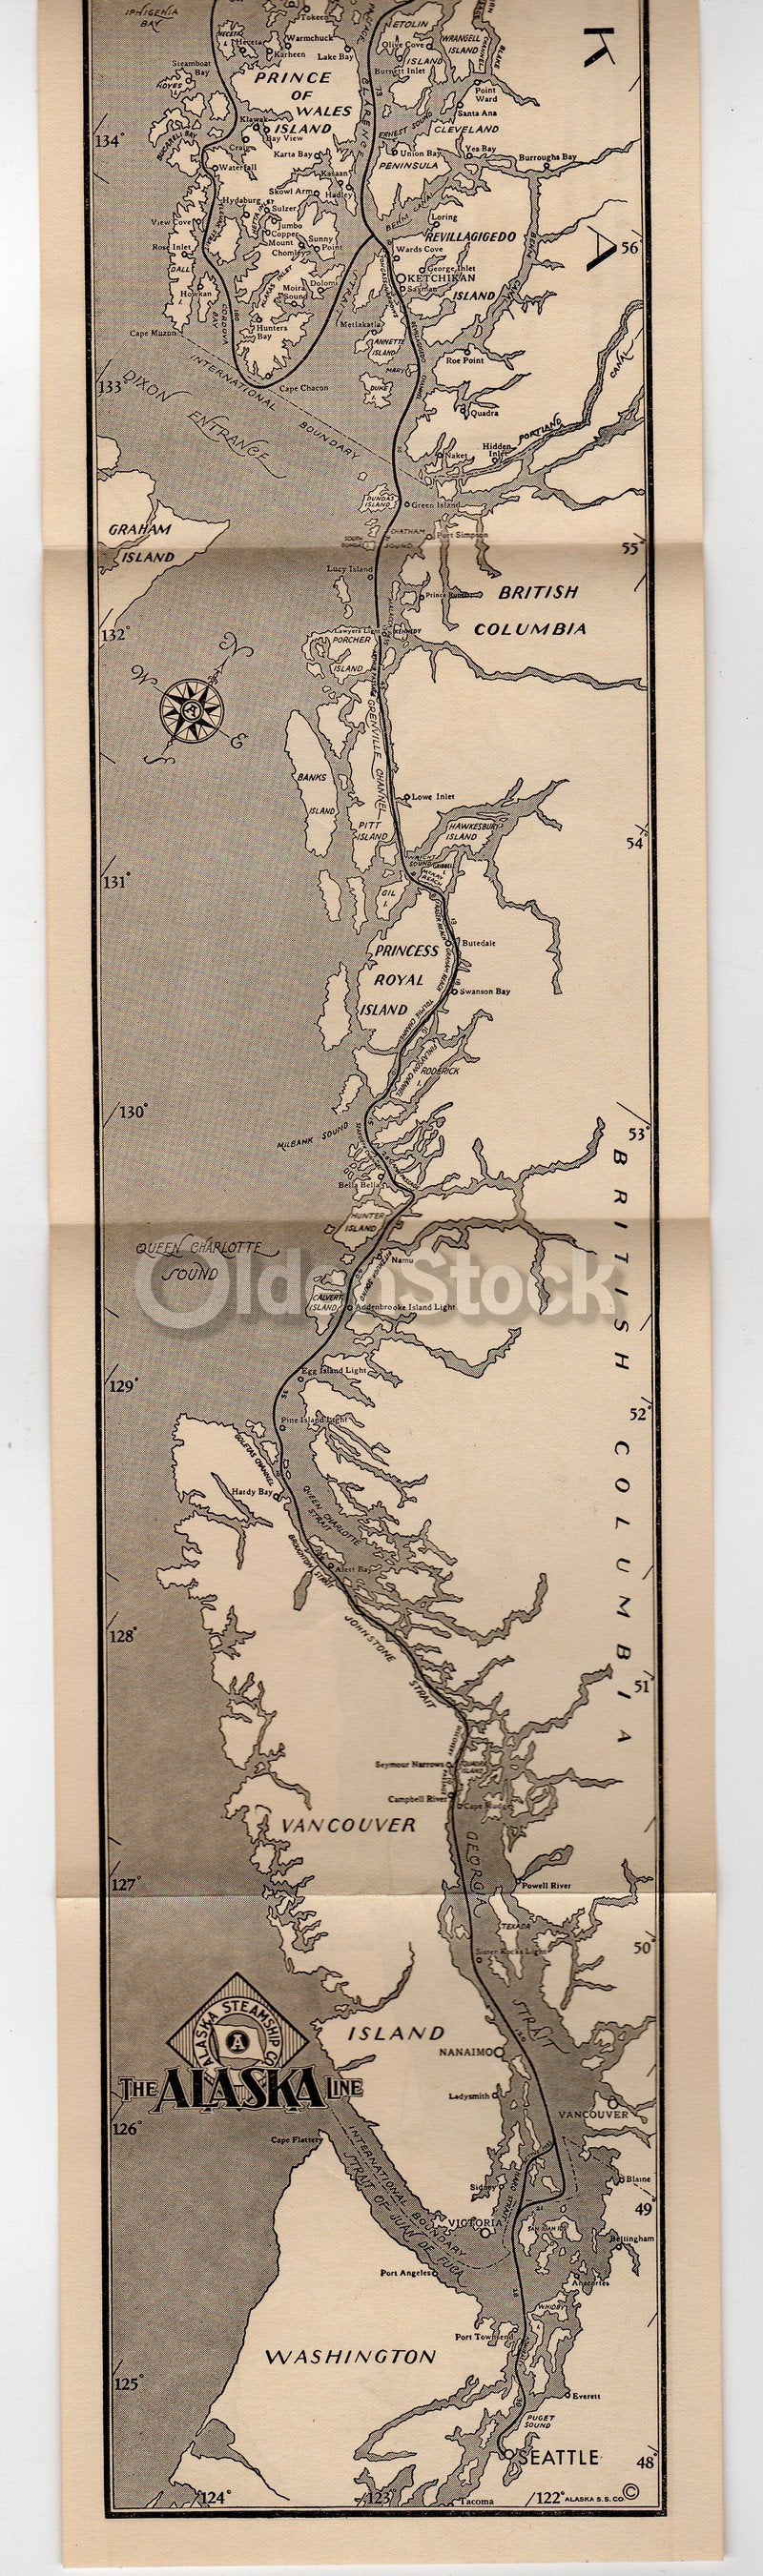 Alaska Steamship Cruise Line Rare Antique Graphic Advertising Map & Travel Booklet